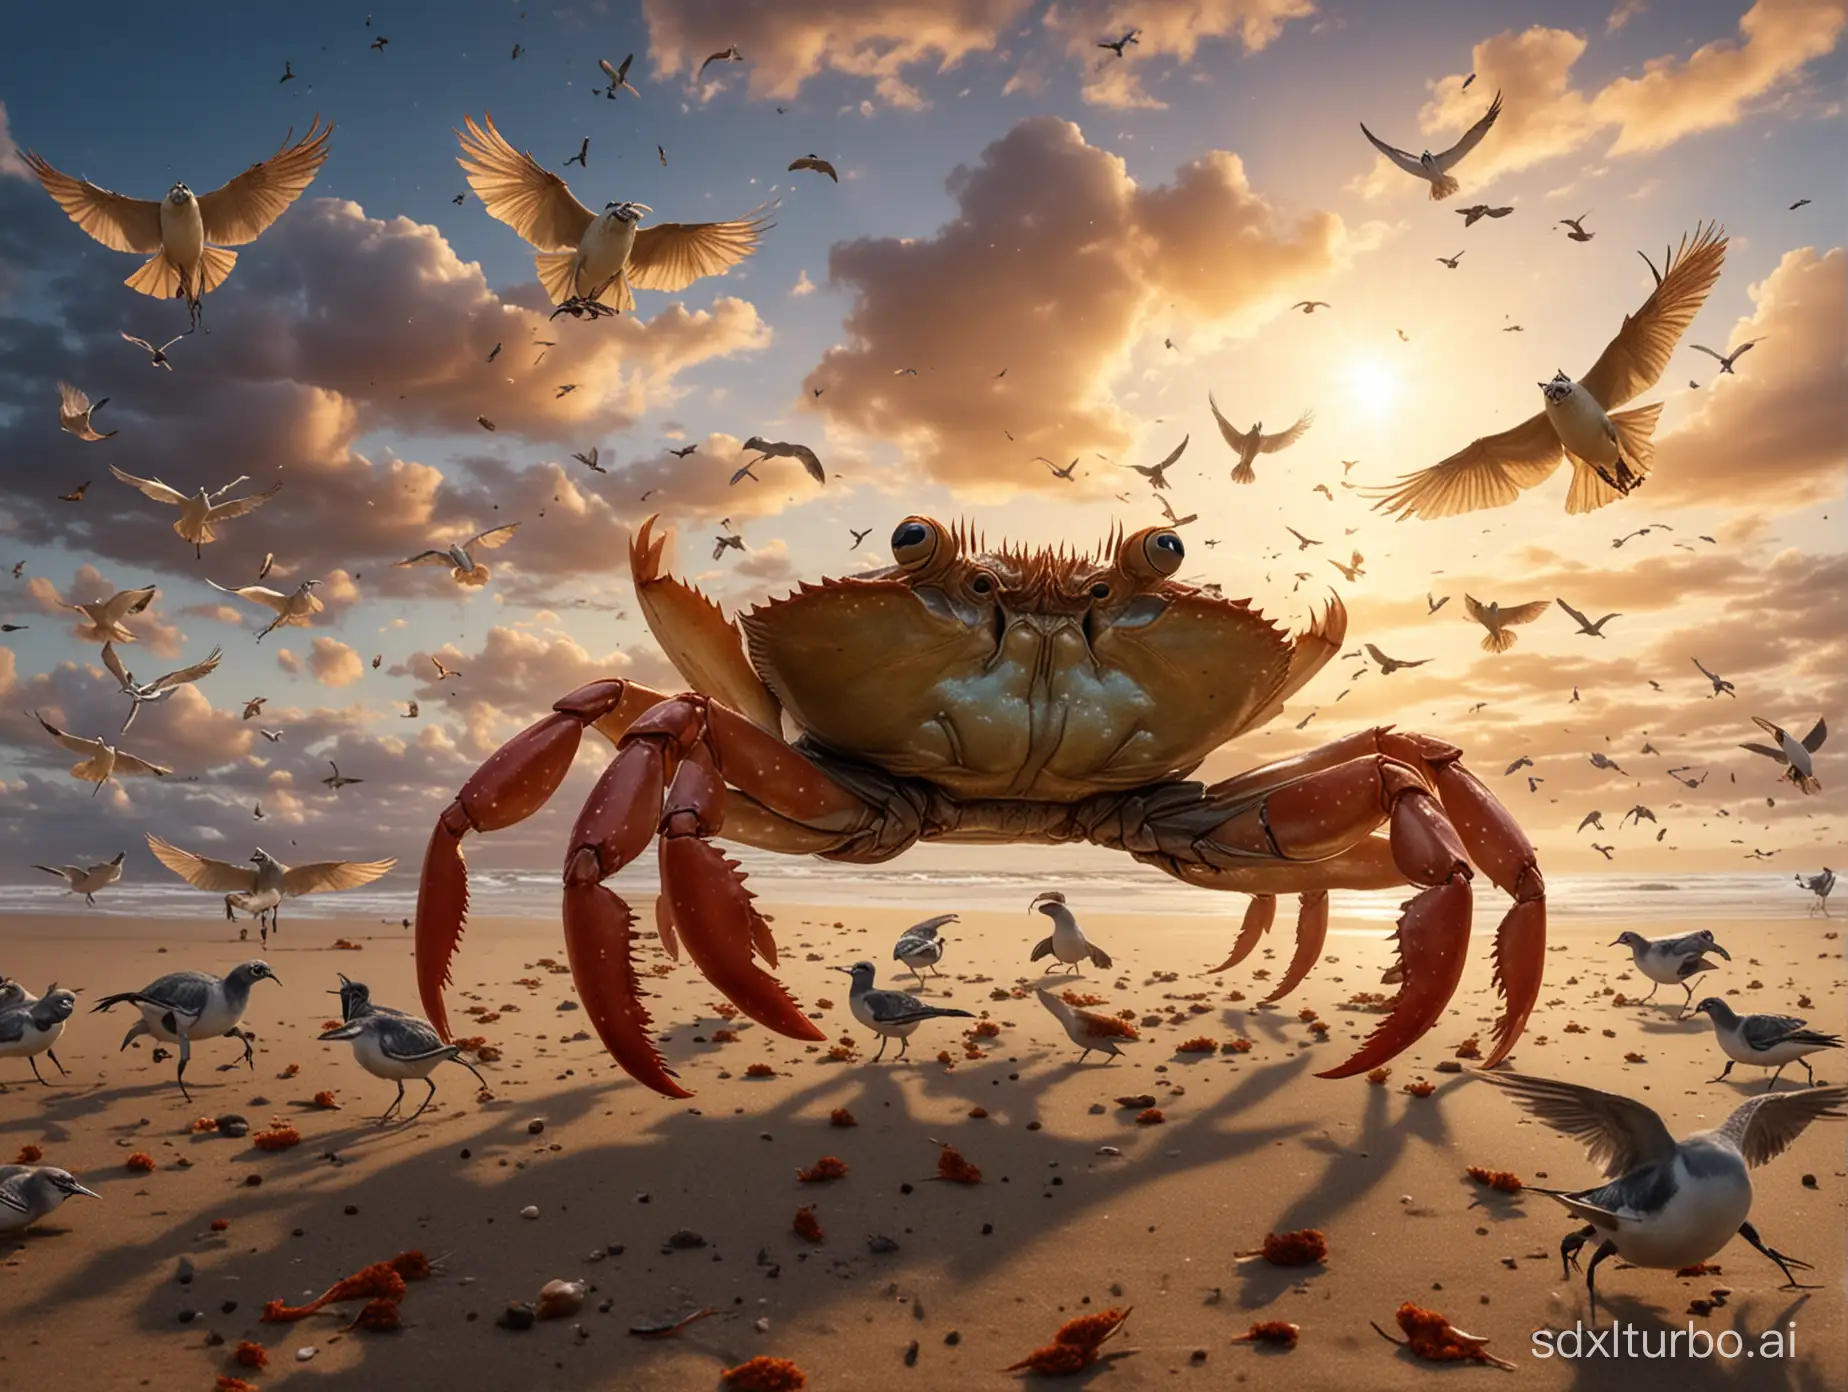 An Australian emperor crab dances in the sky, surrounded by various birds flying around.